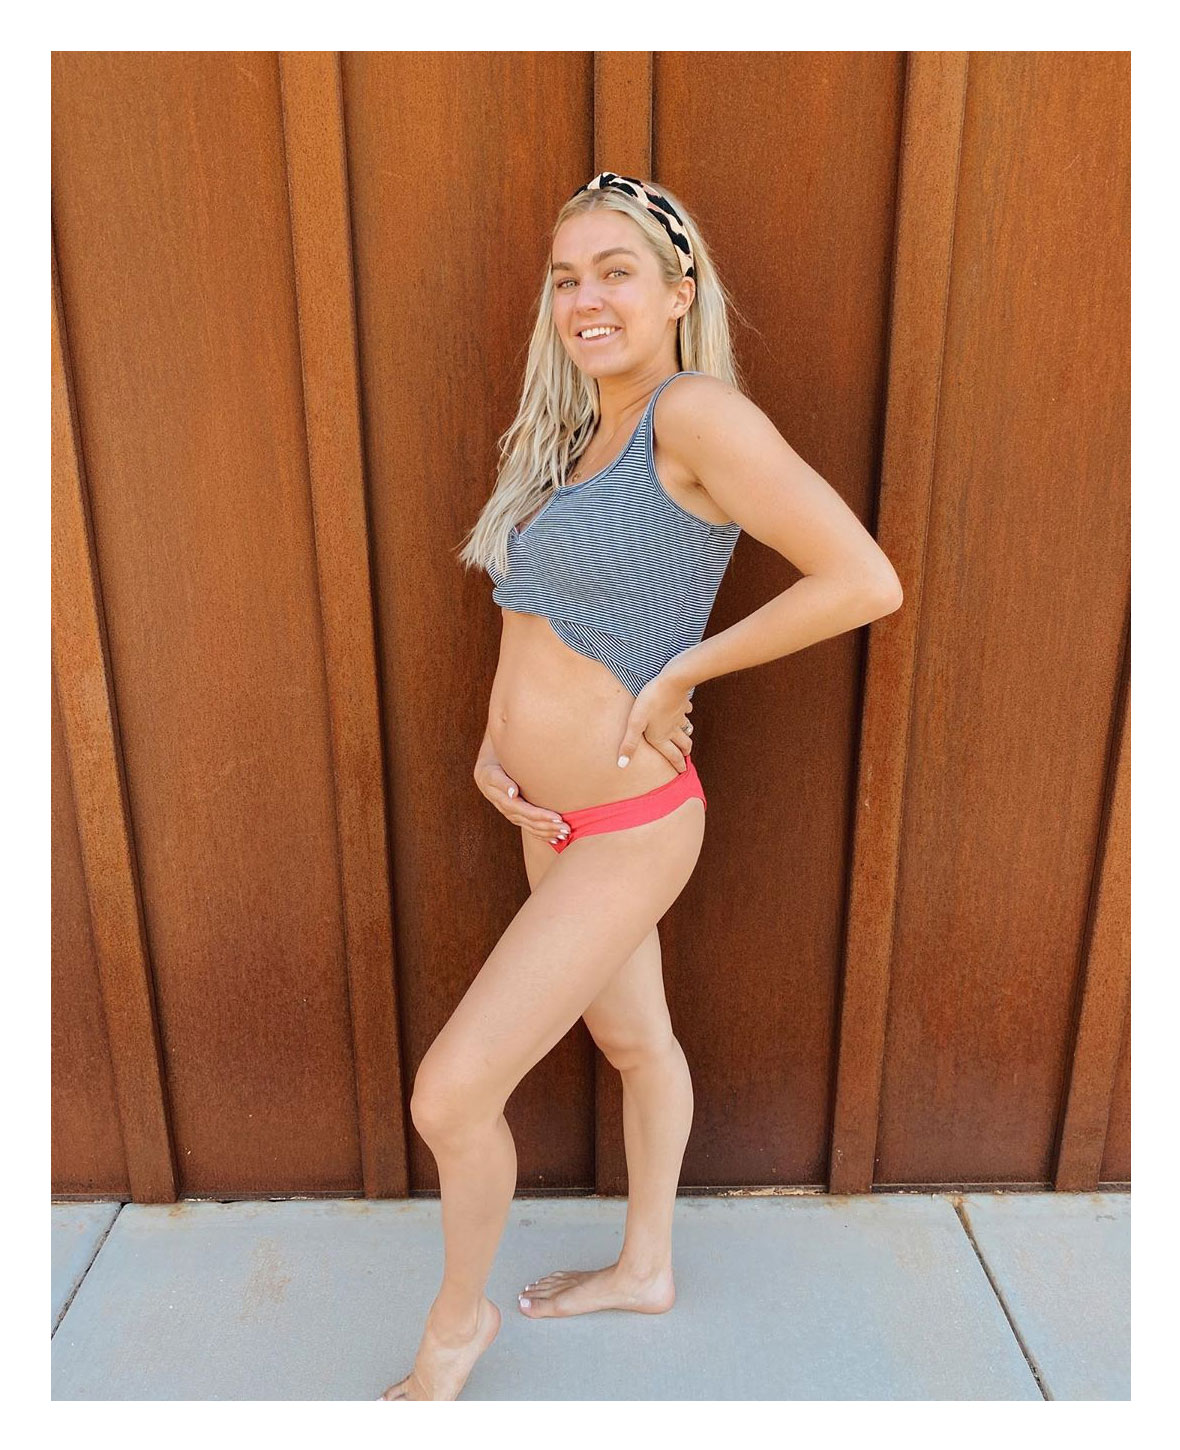 https://www.usmagazine.com/wp-content/uploads/2020/07/Pregnant-Lindsay-Arnold-Recalls-Wondering-Why-Her-Bump-Wasnt-Popping.jpg?quality=62&strip=all